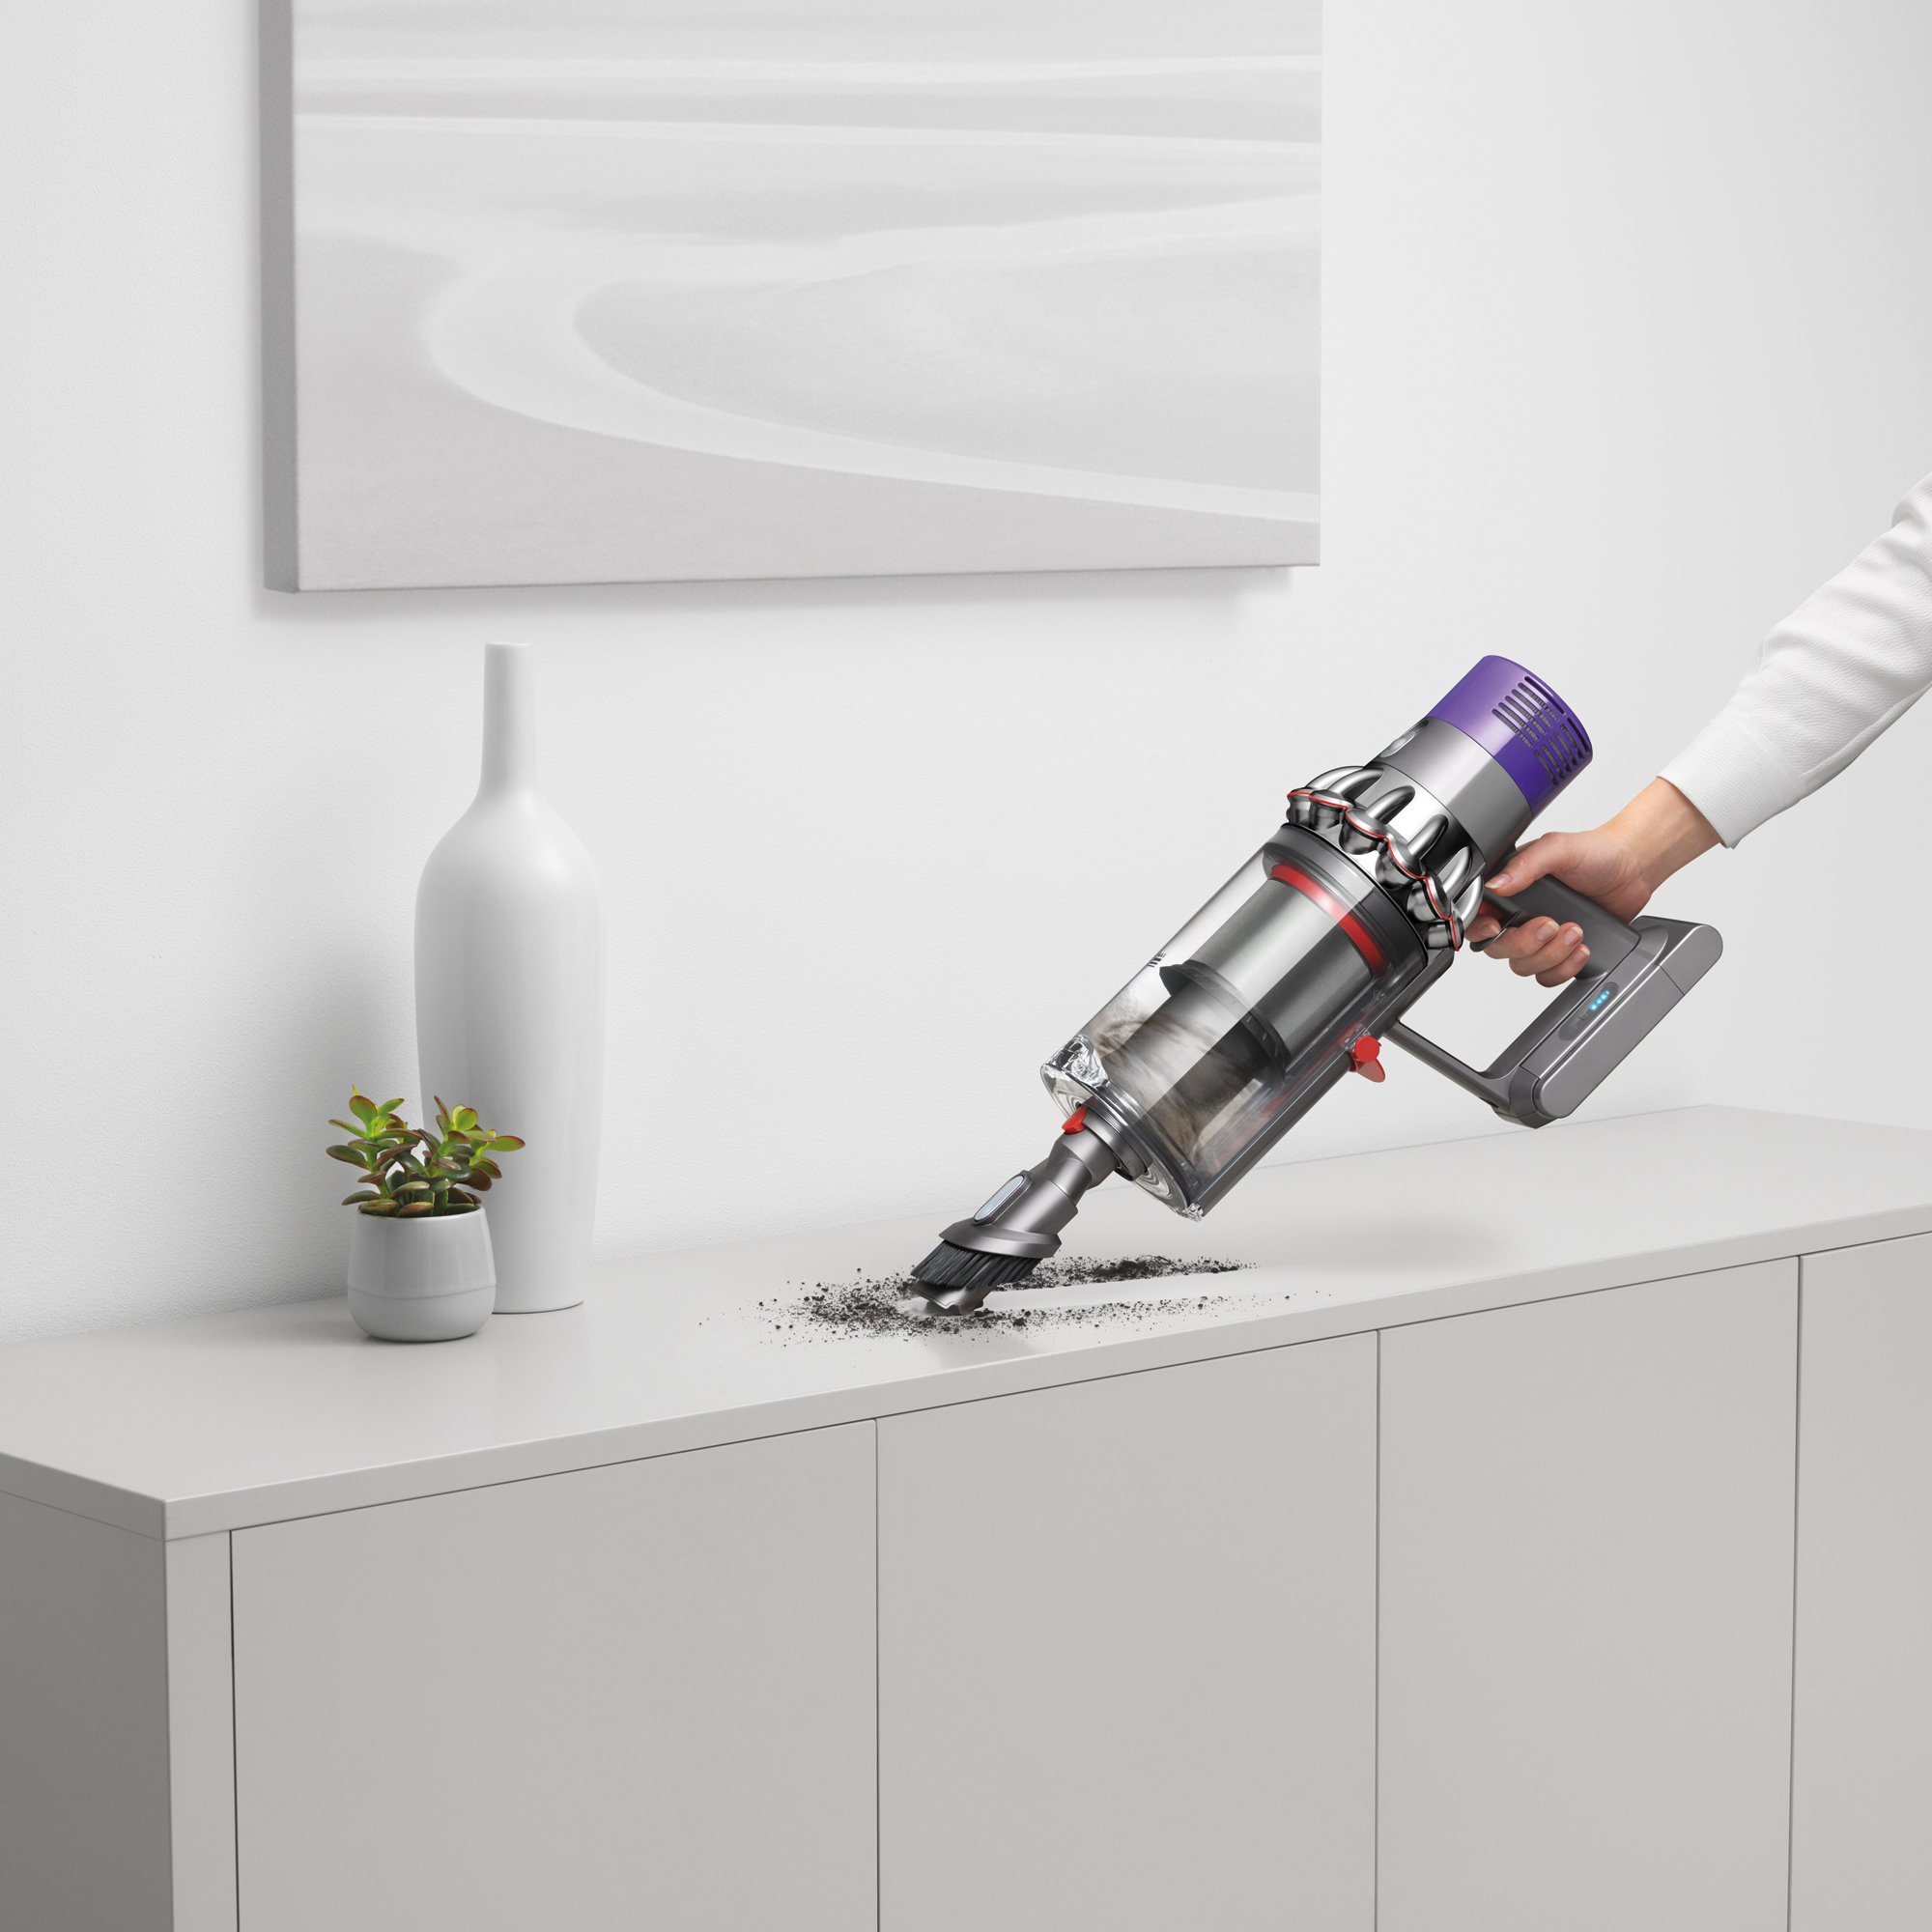 Dyson V10 Absolute Cordless Vacuum | Copper | Refurbished - image 5 of 7